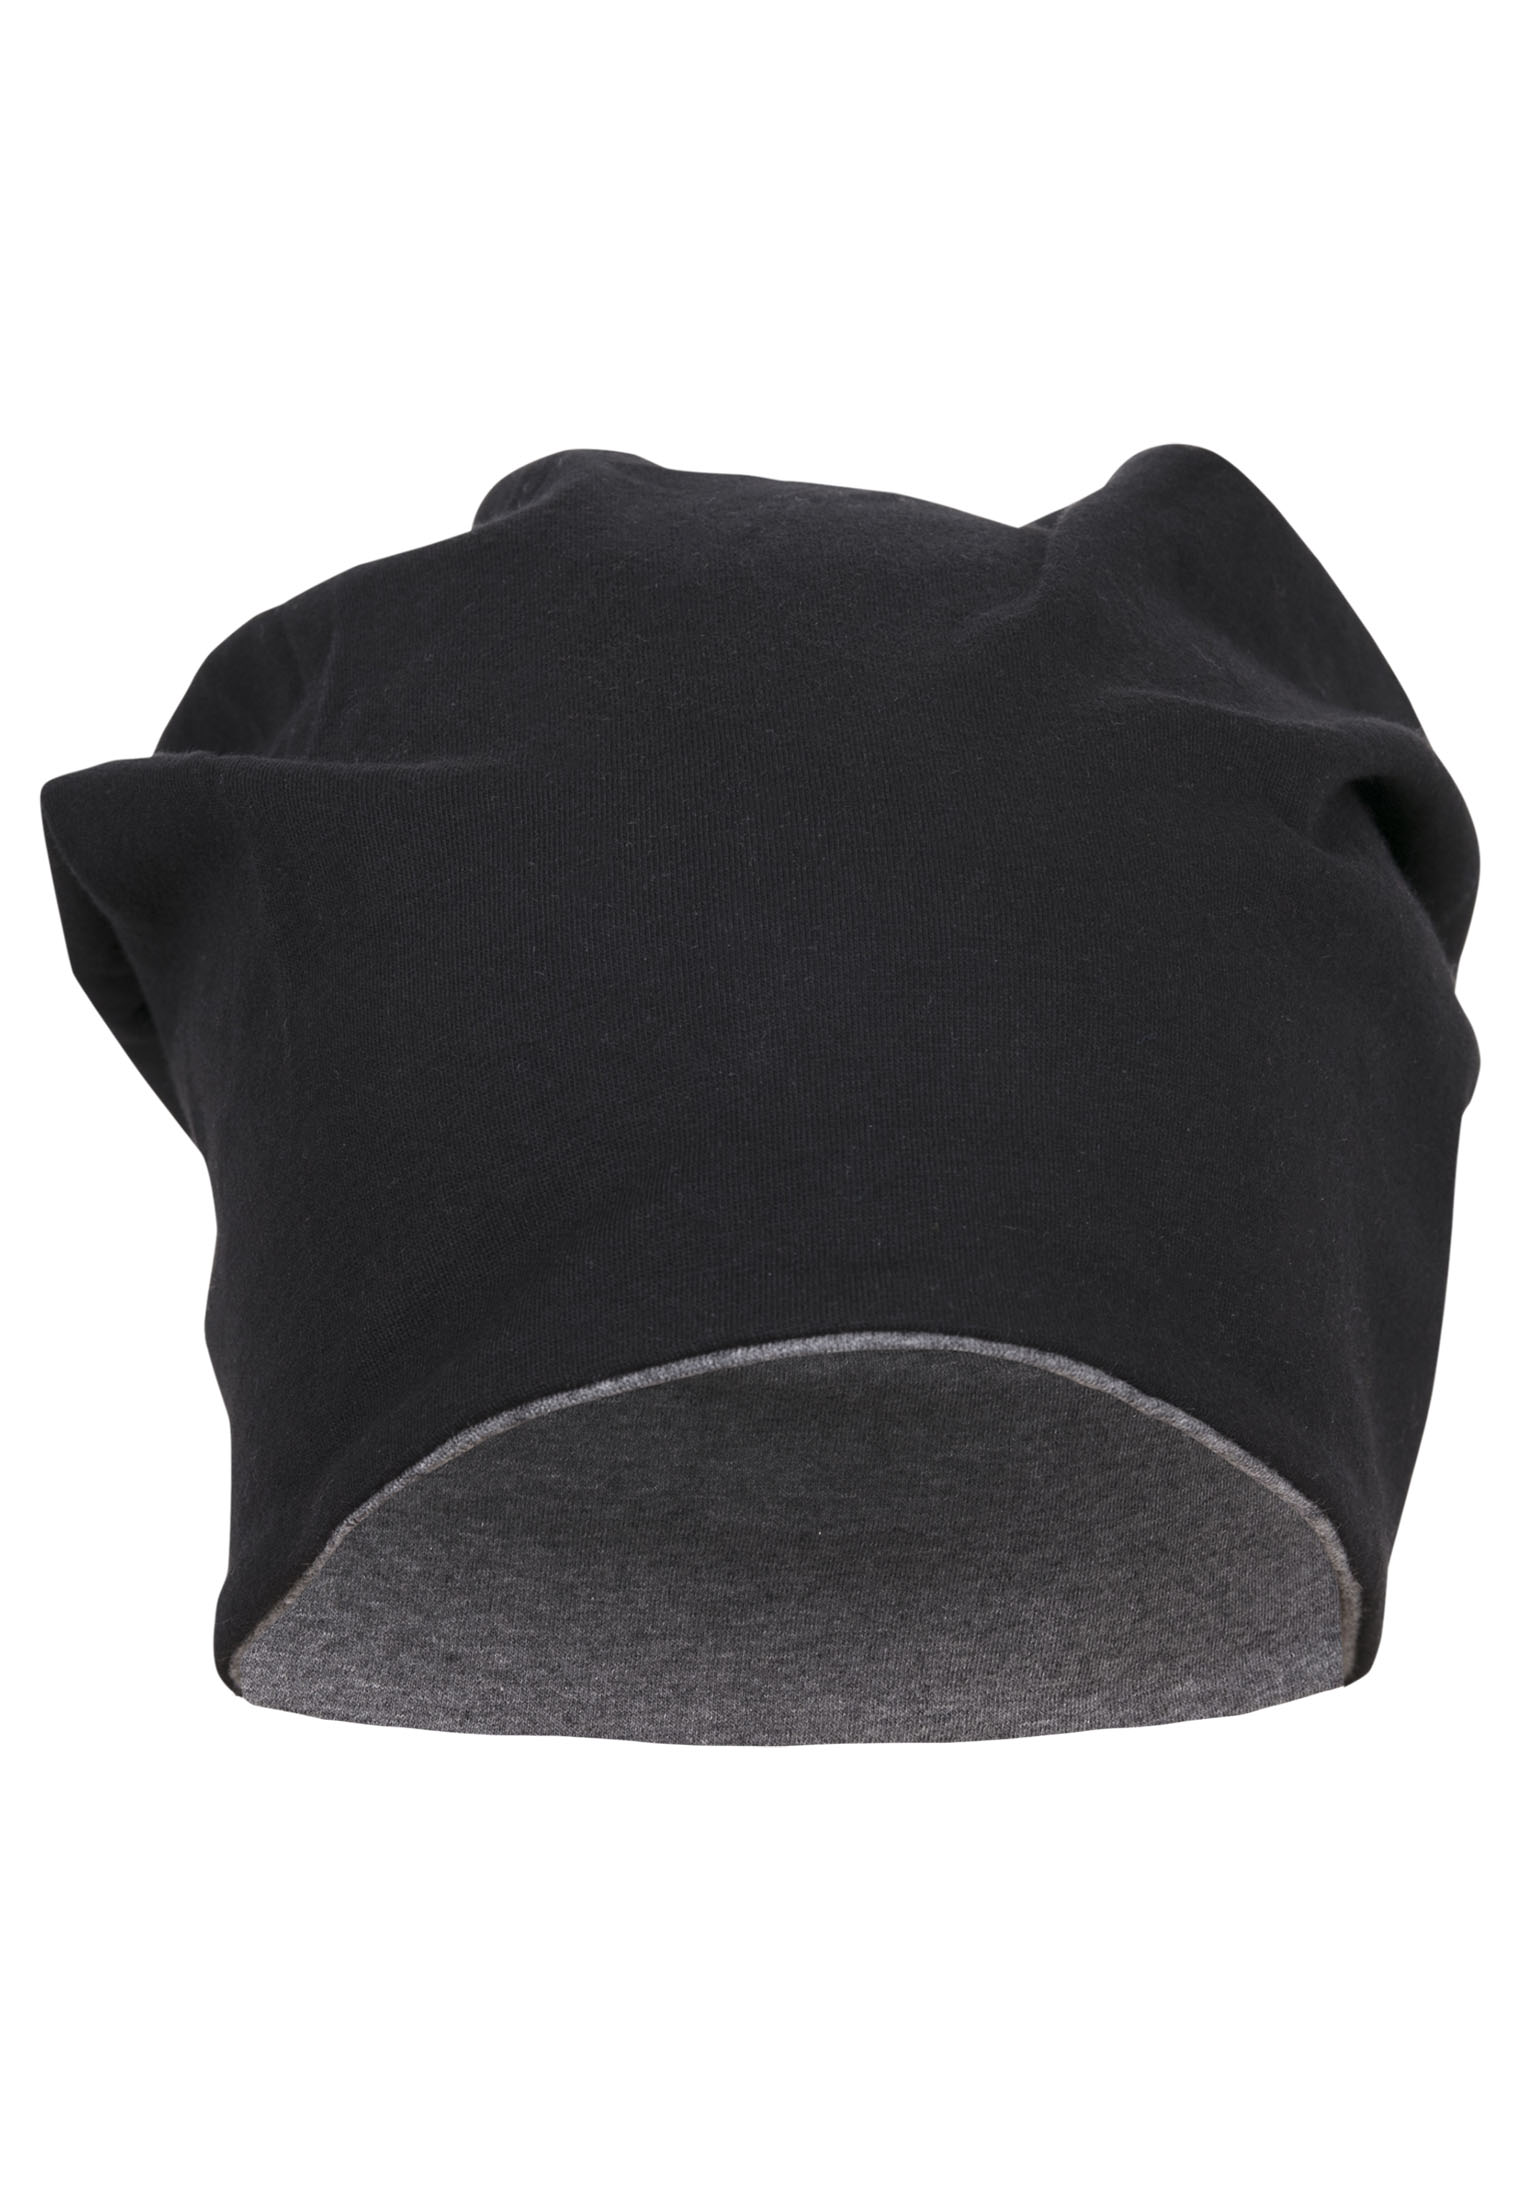 Jersey cap double-sided blk/ht. Charcoal